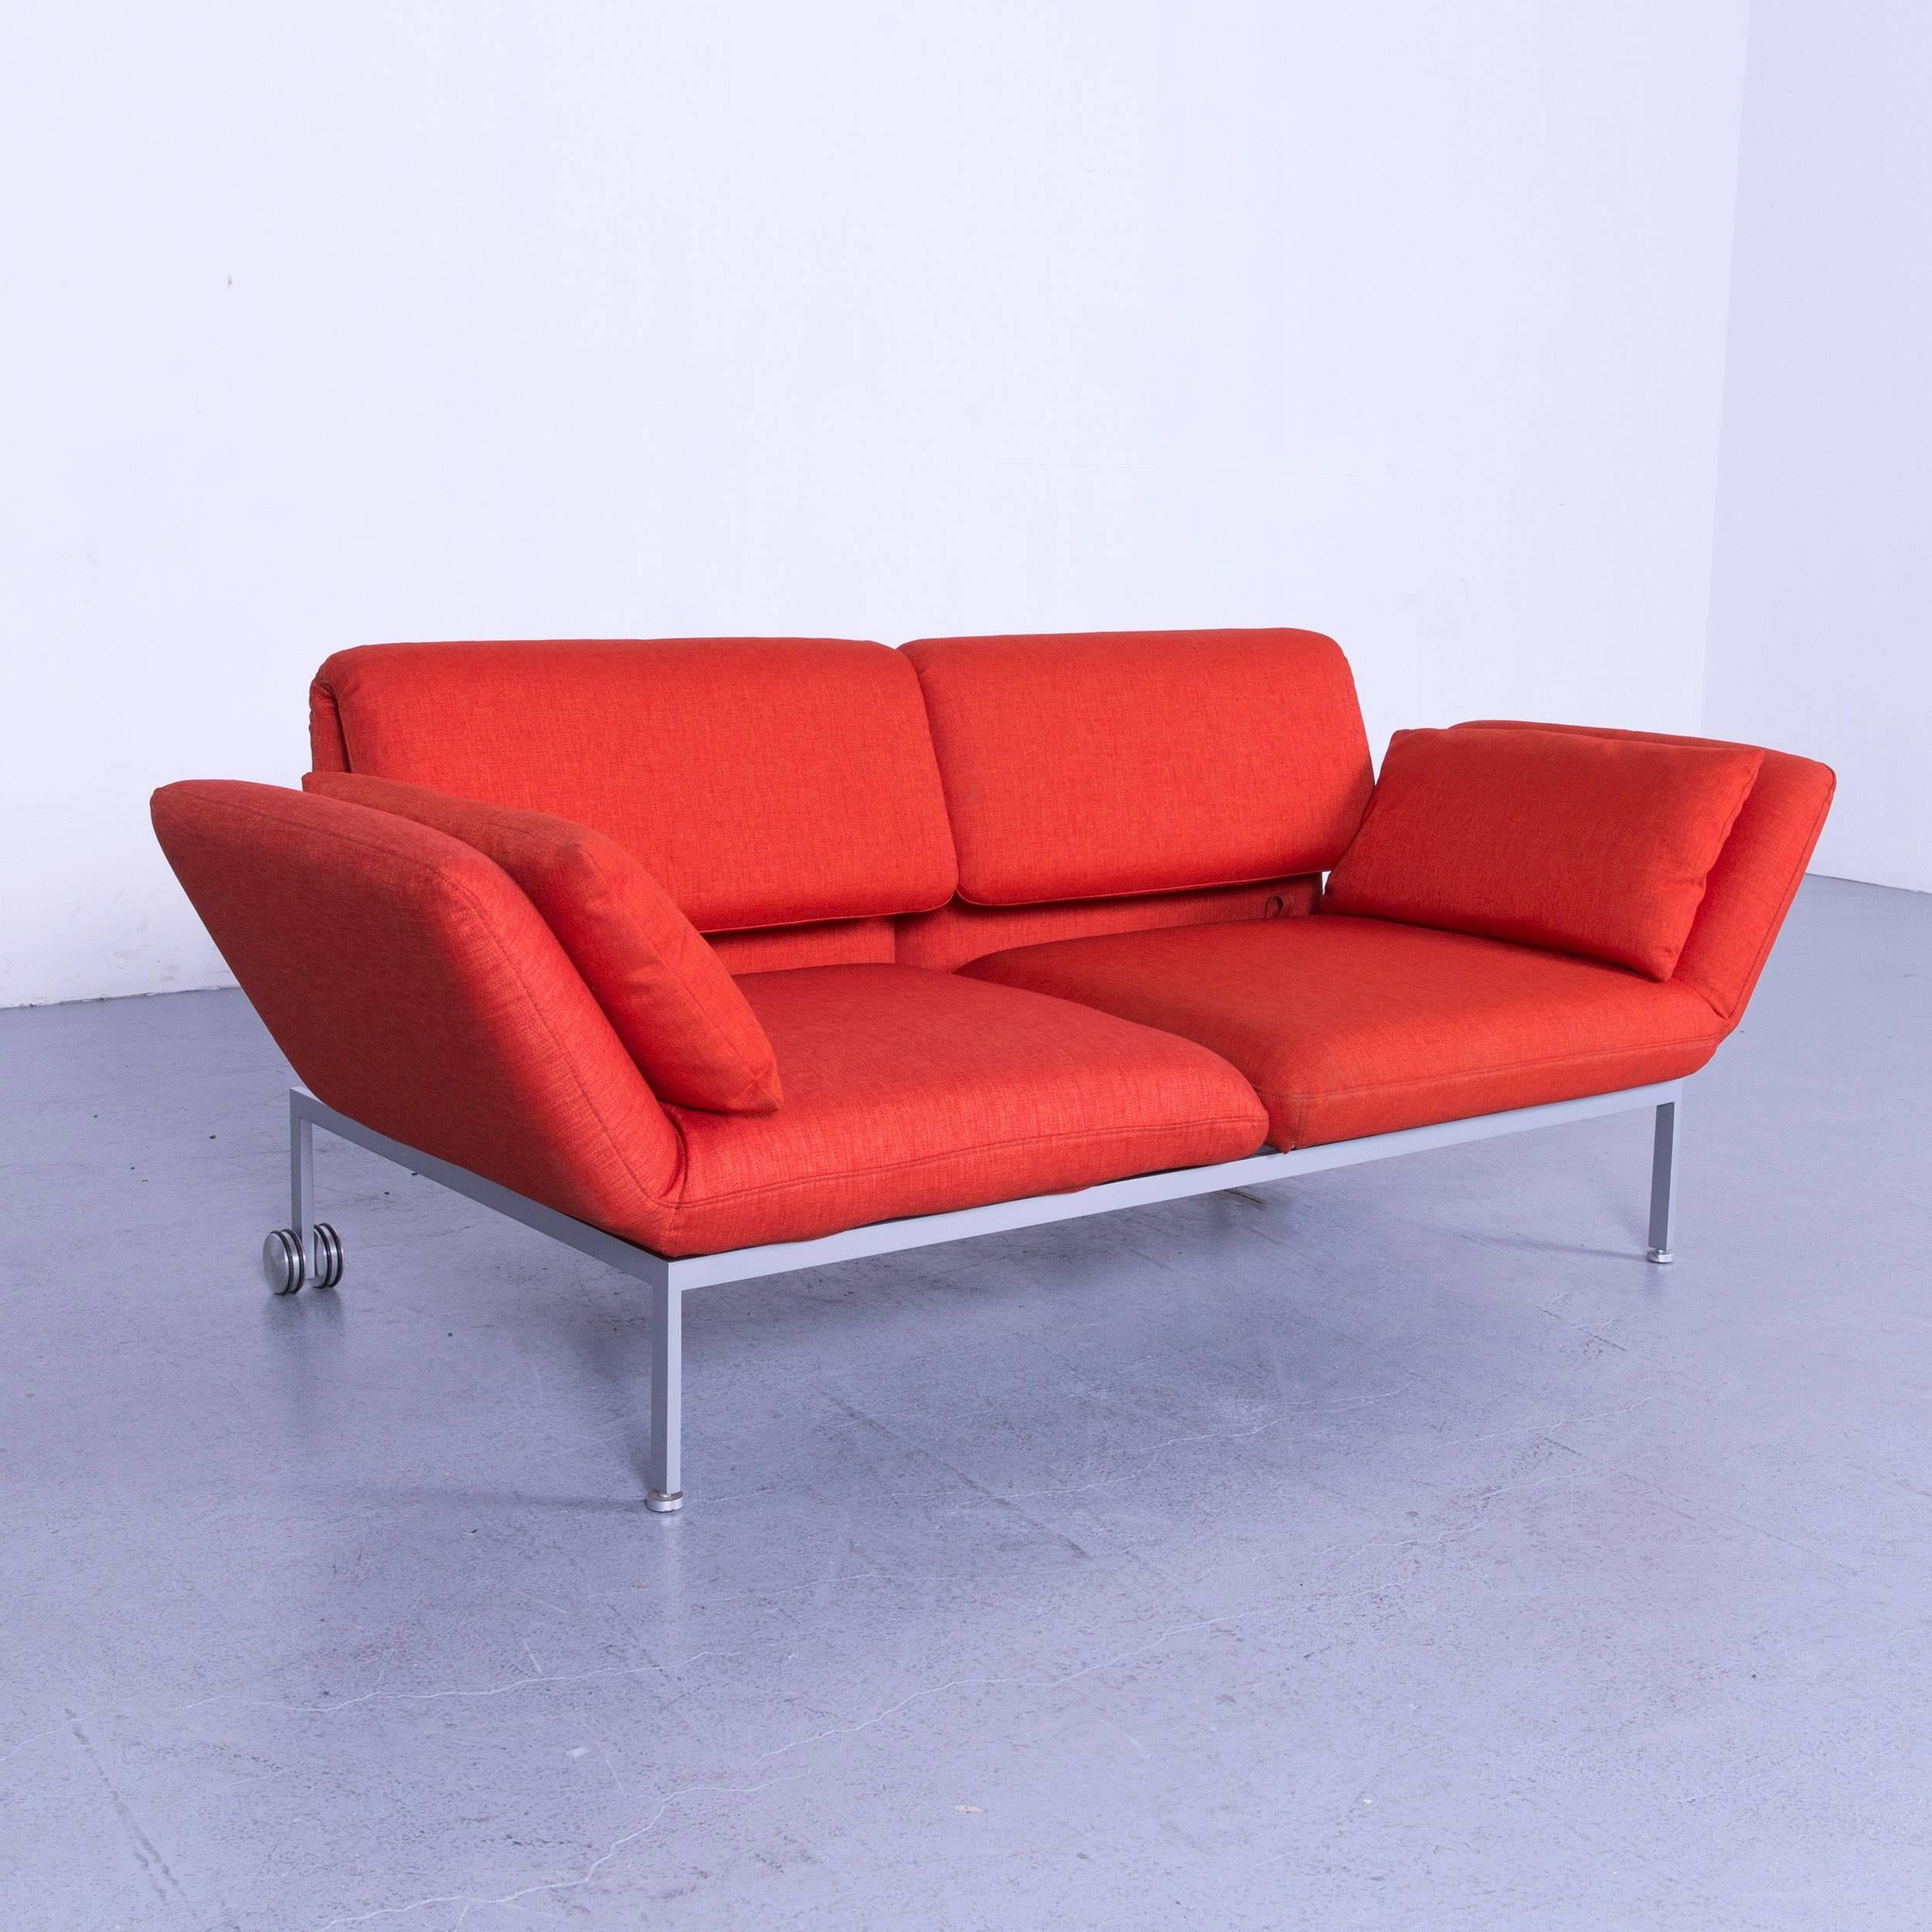 Brühl & Sippold Roro Designer Bed Sofa in Red Orange Fabric with Great Functions In Good Condition For Sale In Cologne, DE